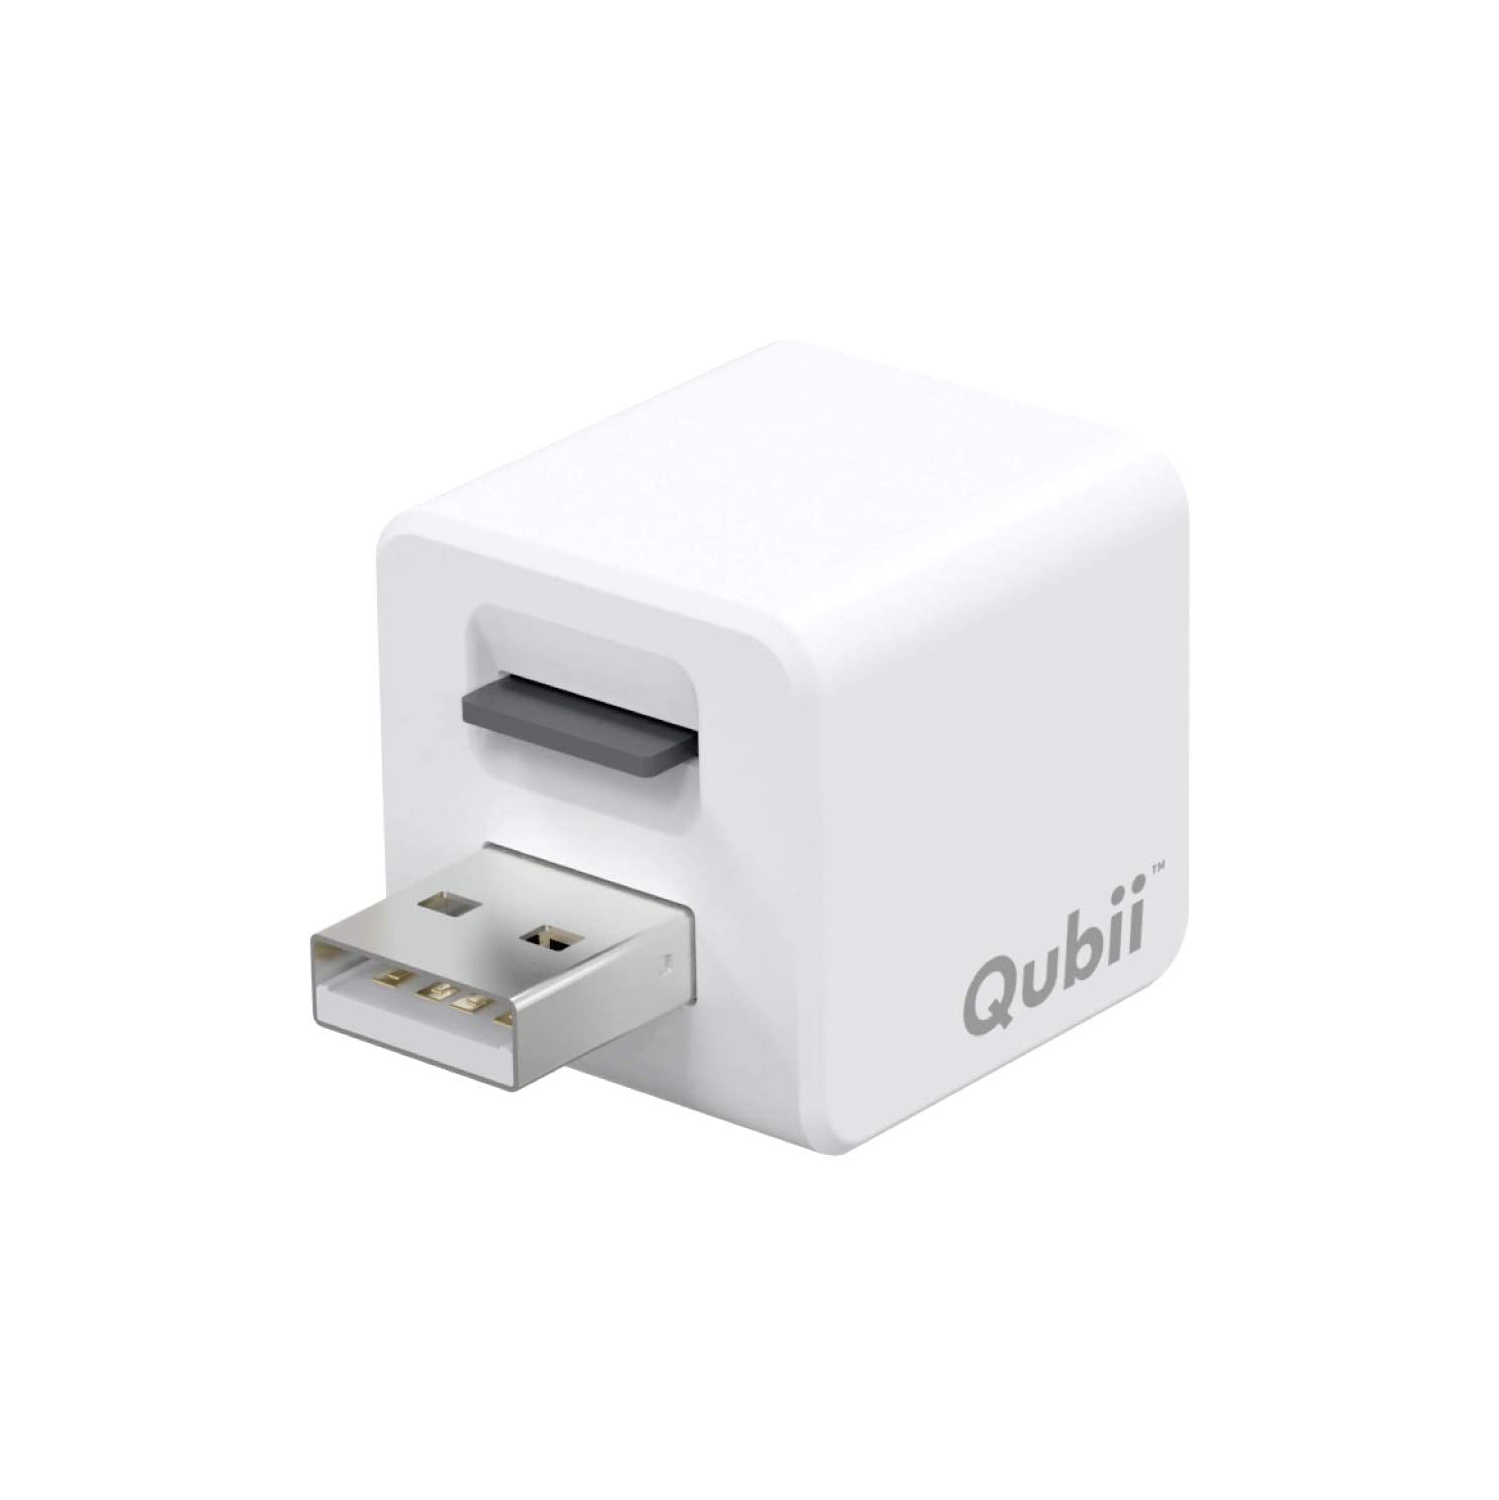 Qubii Photo Storage Device for iPhone & iPad, Auto Backup Photos & Videos, Photo Stick for iPhone [microSD Card Not